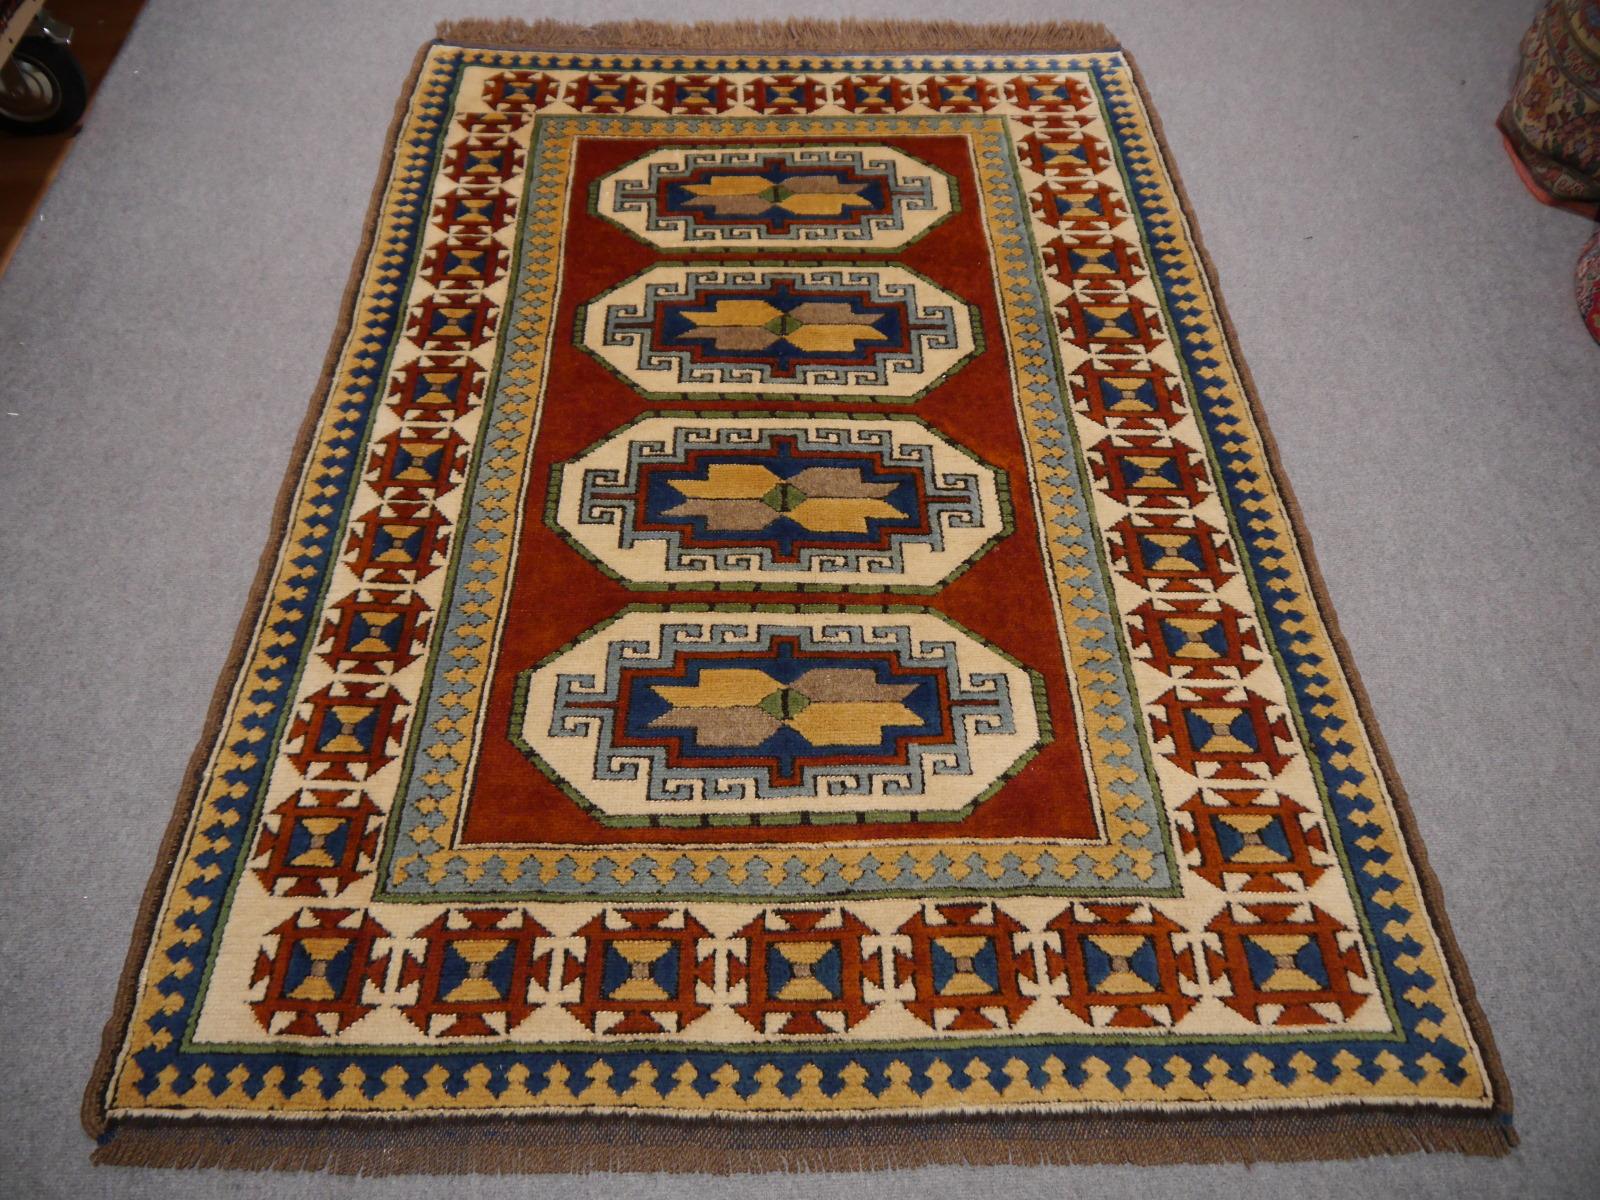 Stunning Turkish Kazak Azeri rug vintage with Caucasian Design - Djoharian Collection

Turkish rugs and carpets are mainly made of fine, hand-spun wool, 
This wonderful and stunning example comes from Eastern Anatolia.

This rug was made with four